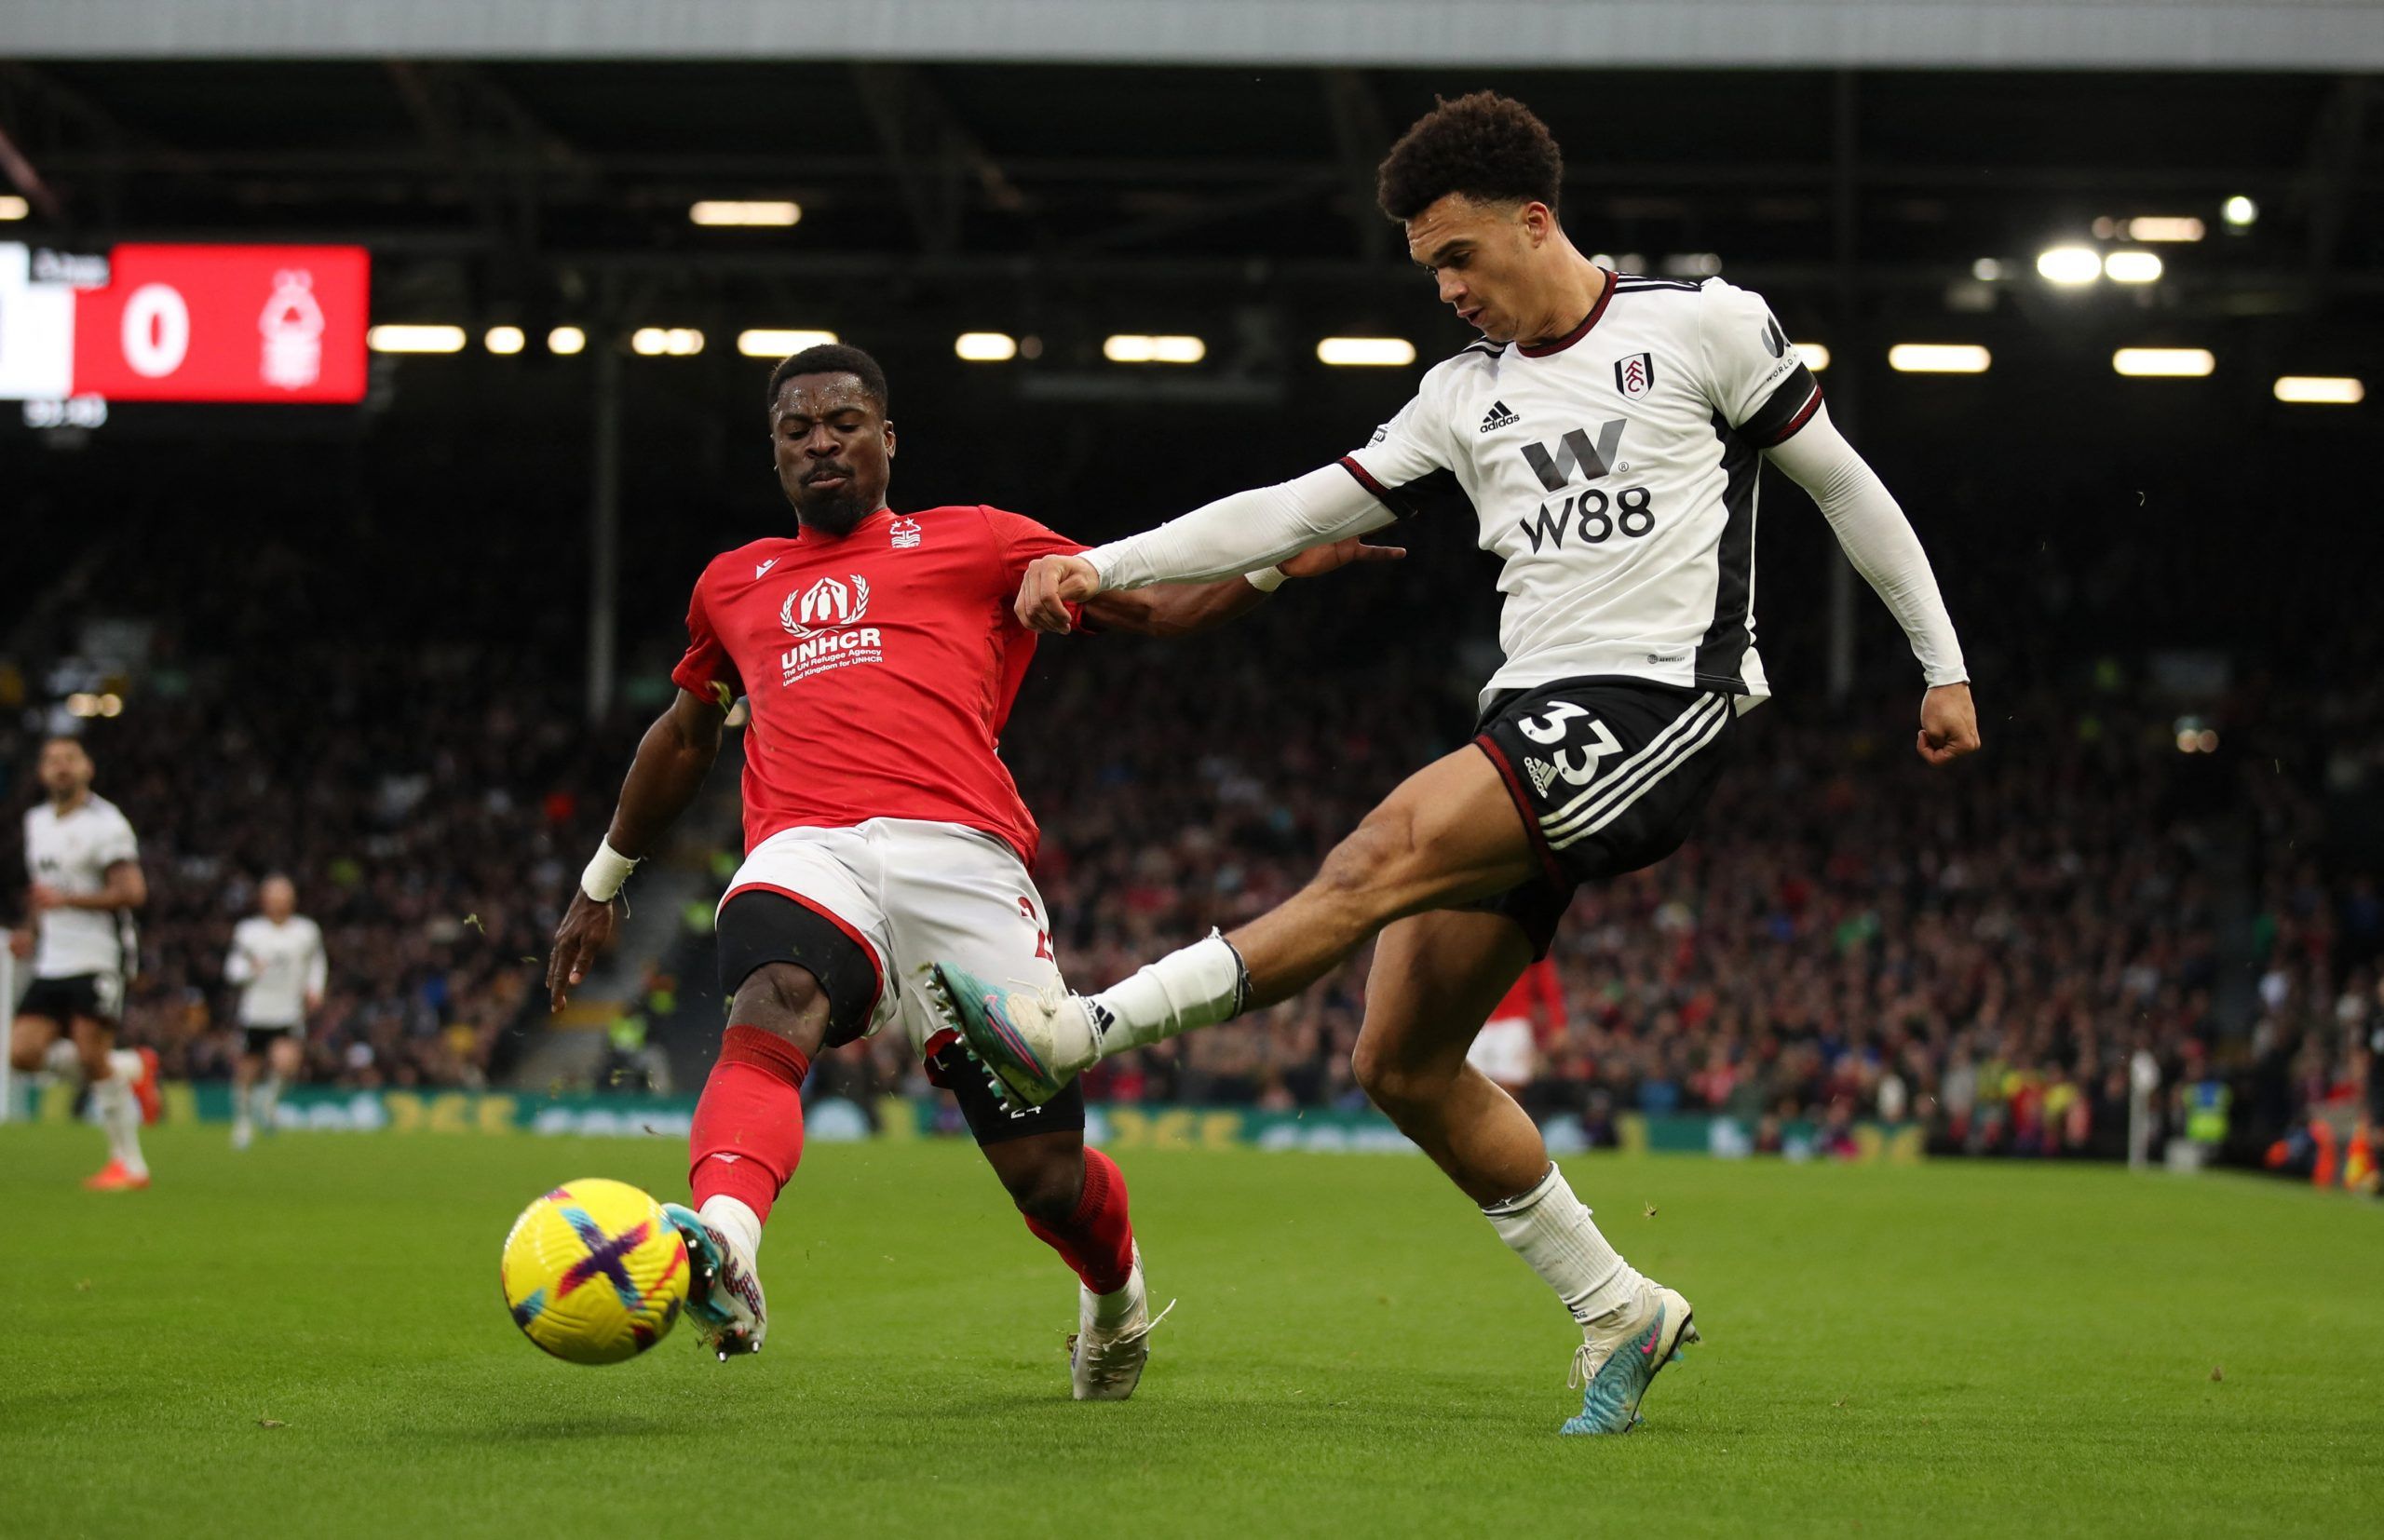 Soccer Football - Premier League - Fulham v Nottingham Forest - Craven Cottage, London, Britain - February 11, 2023 Fulham's Antonee Robinson in action with Nottingham Forest's Serge Aurier REUTERS/Chris Radburn EDITORIAL USE ONLY. No use with unauthorized audio, video, data, fixture lists, club/league logos or 'live' services. Online in-match use limited to 75 images, no video emulation. No use in betting, games or single club /league/player publications.  Please contact your account representa